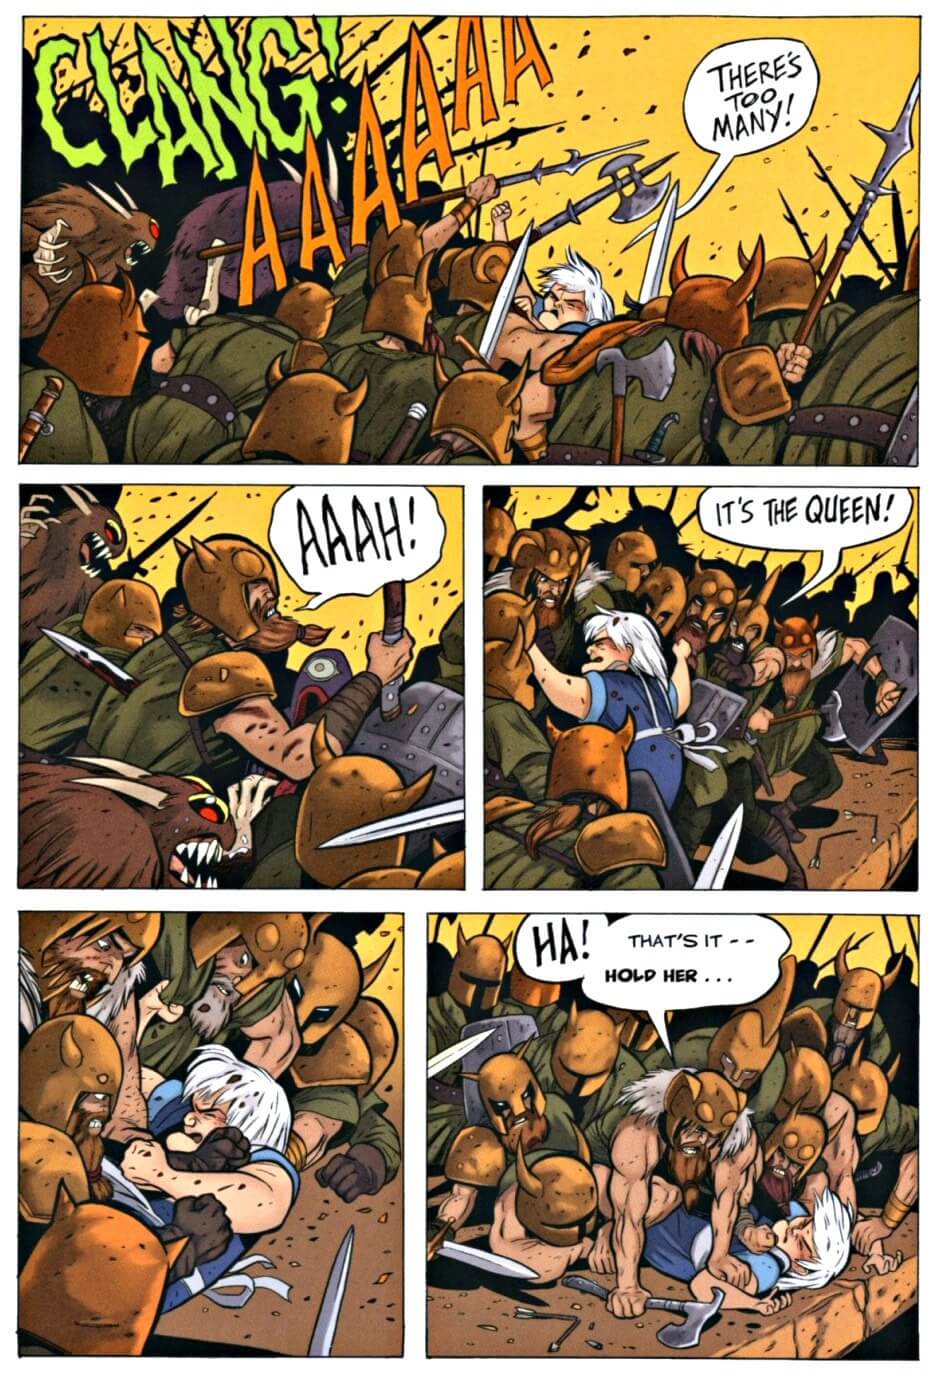 page 39 chapter 1 of bone 9 crown of horns graphic novel